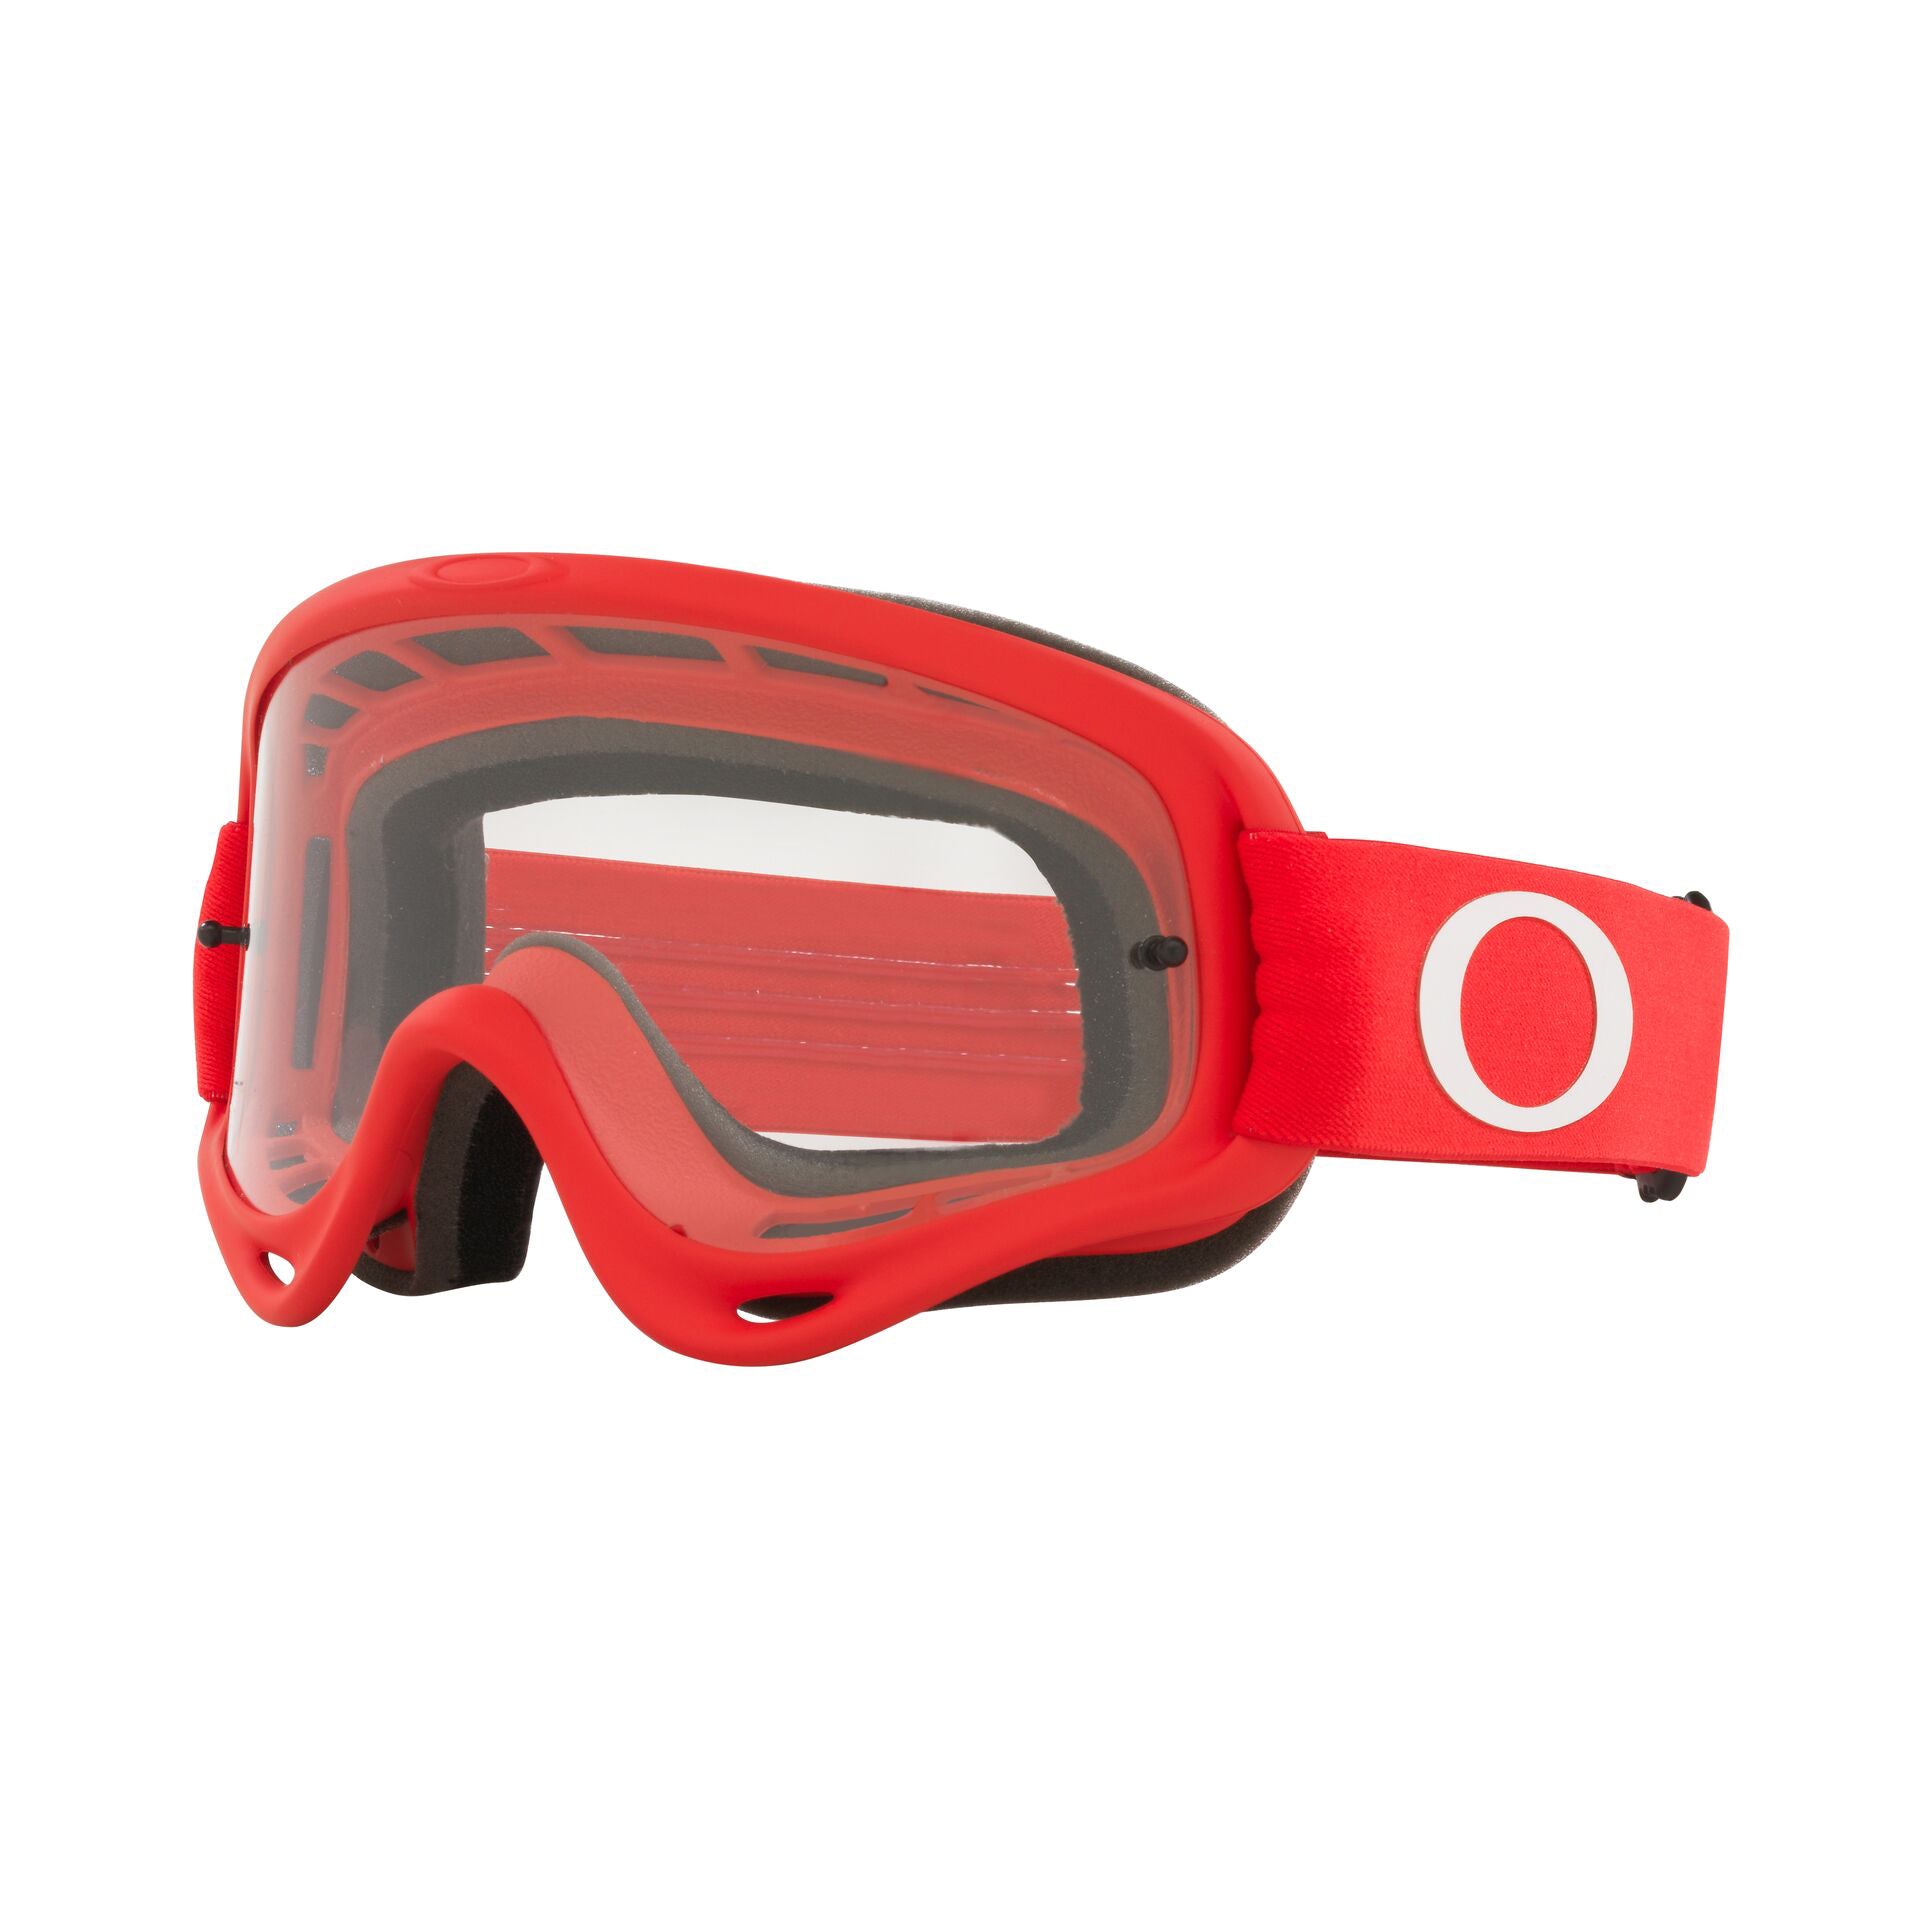 Oakley O Frame XS MX Goggle Moto Red - Clear Lens